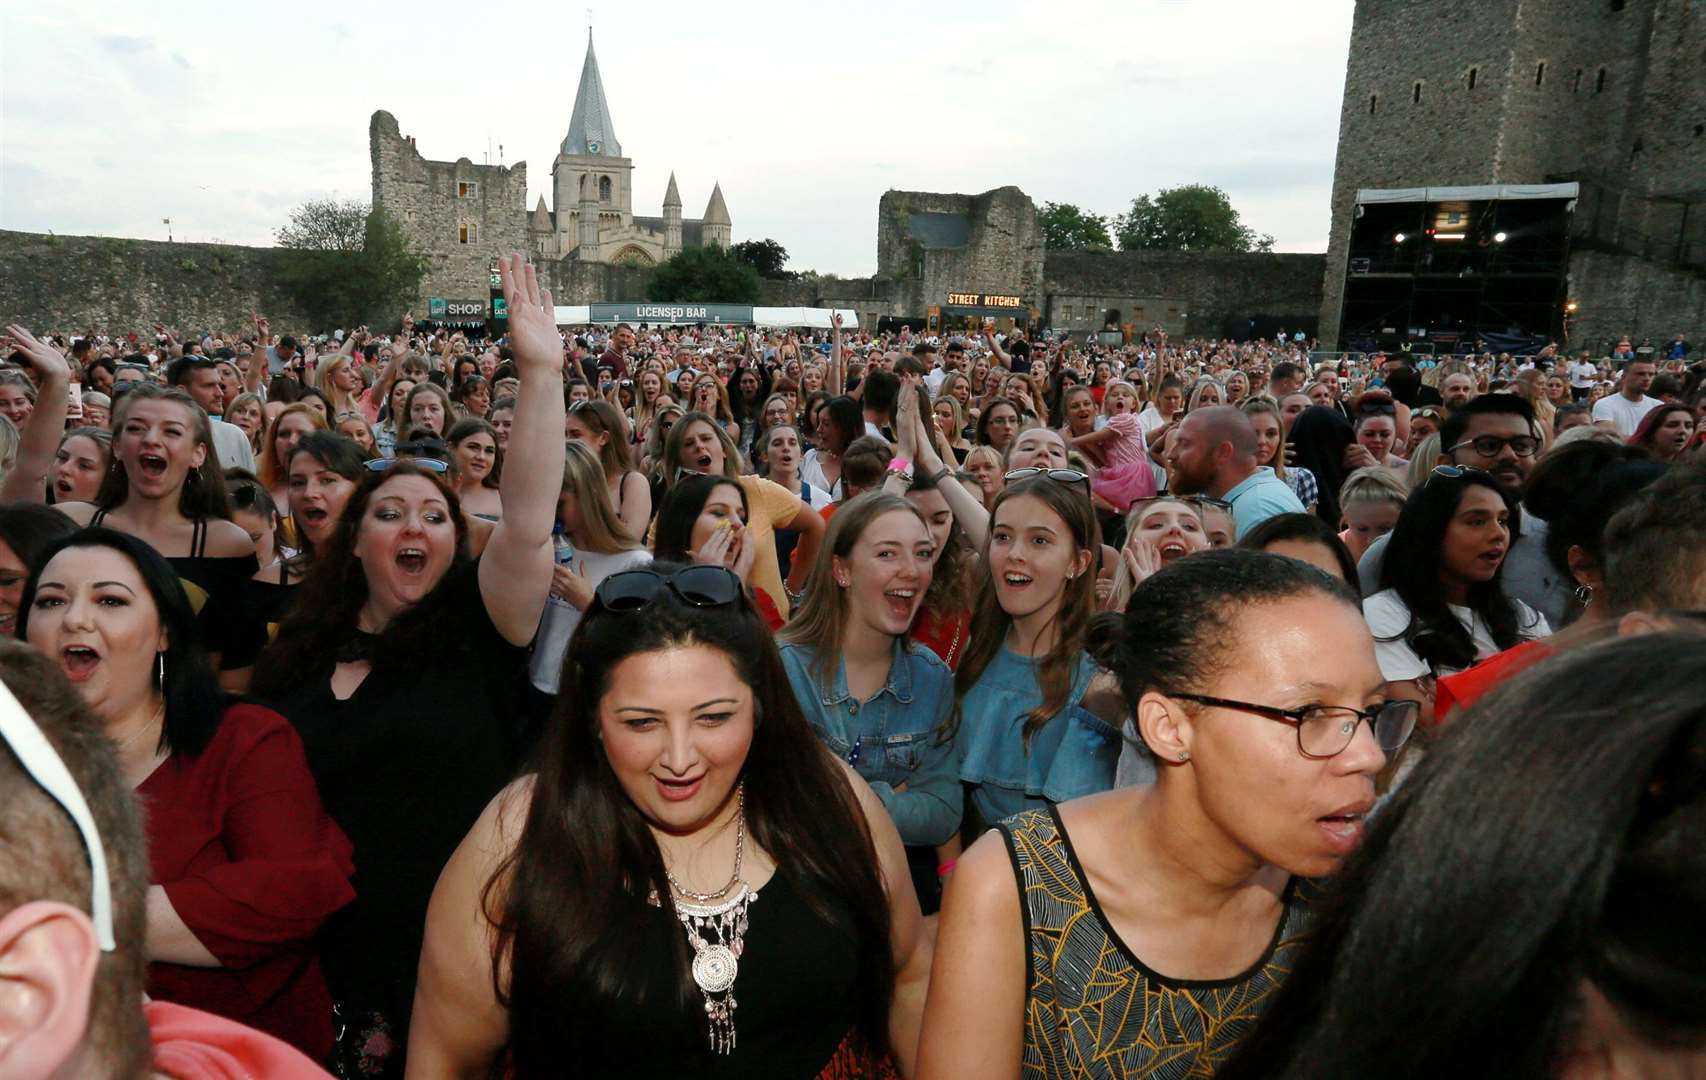 The 4,500 capacity at the Rochester Castle grounds has been labelled as potentially being too small to make enough money